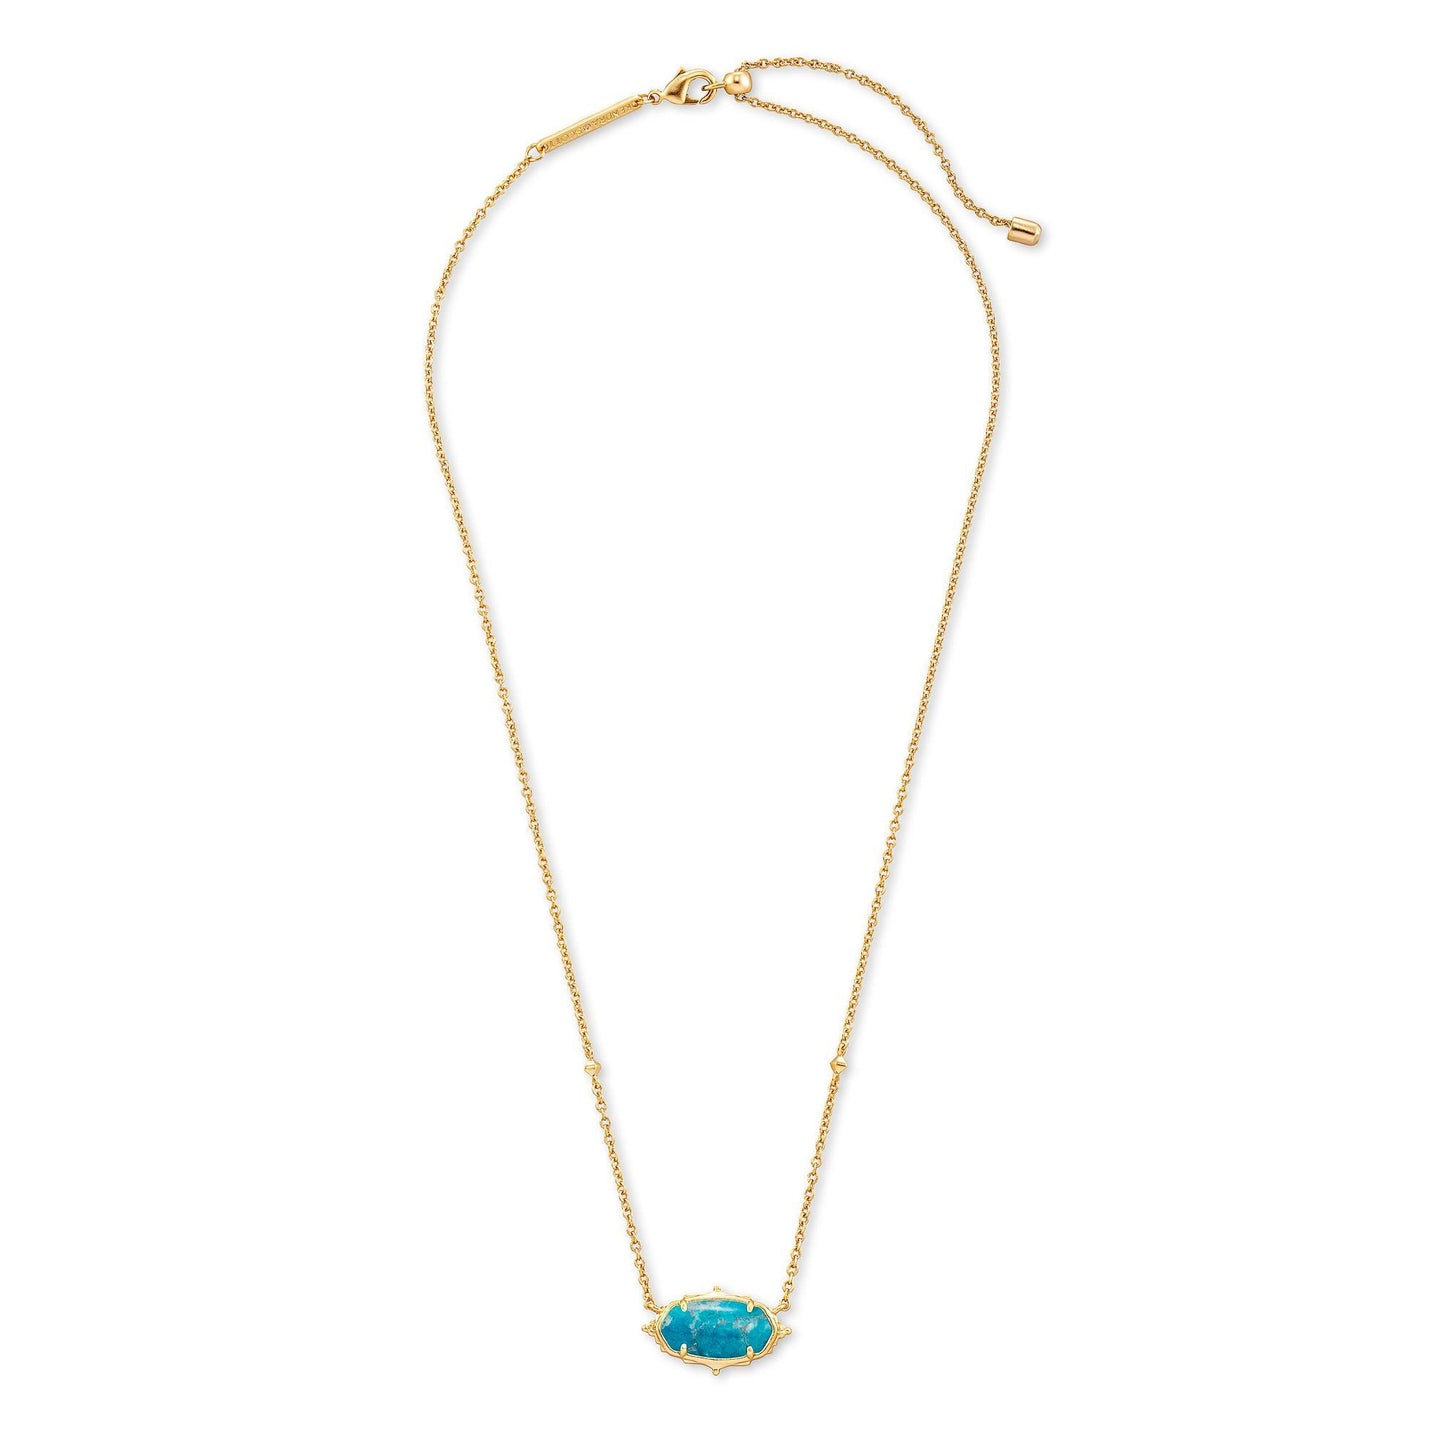 Fall 2 Baroque Elisa Pendant Necklace In Gold Teal Howlite